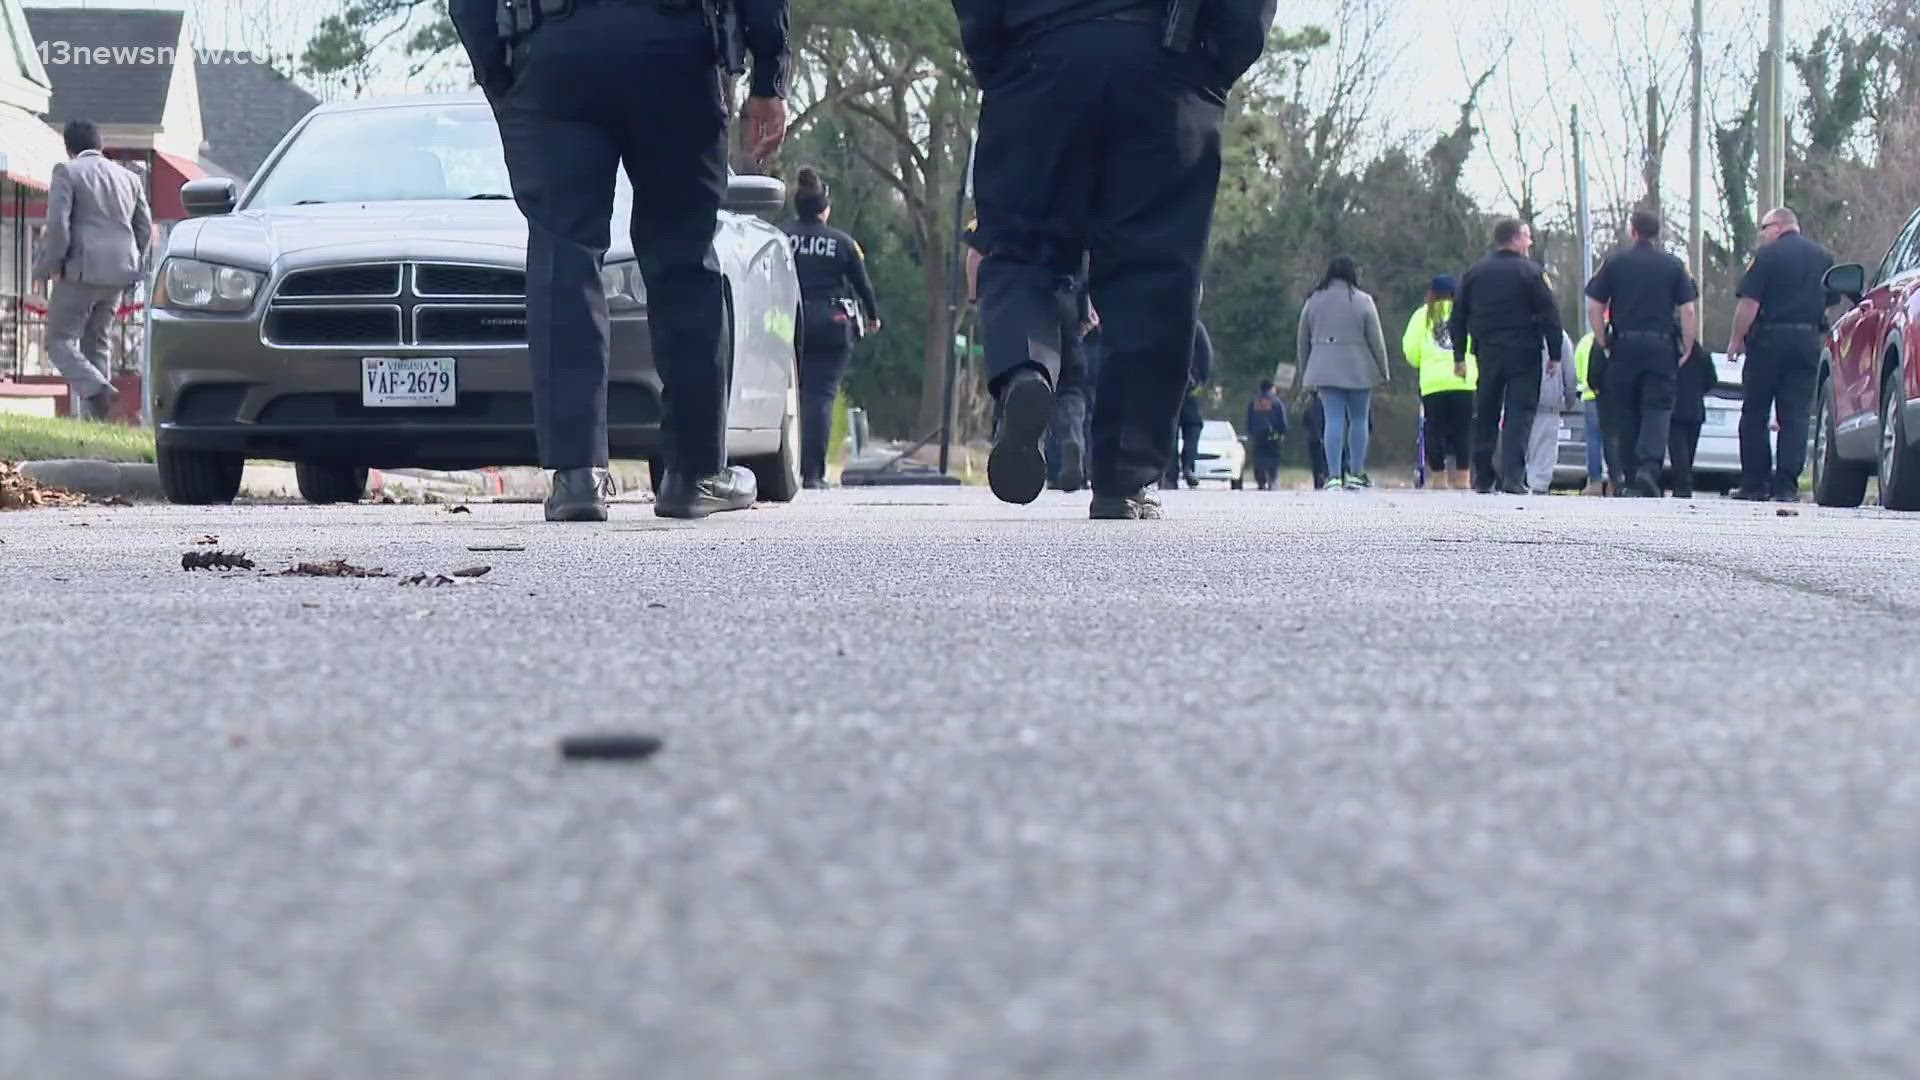 Officers and community activists hit the pavement for a reset walk in Prentis Park. That's where police say someone shot and killed a set of twin brothers.